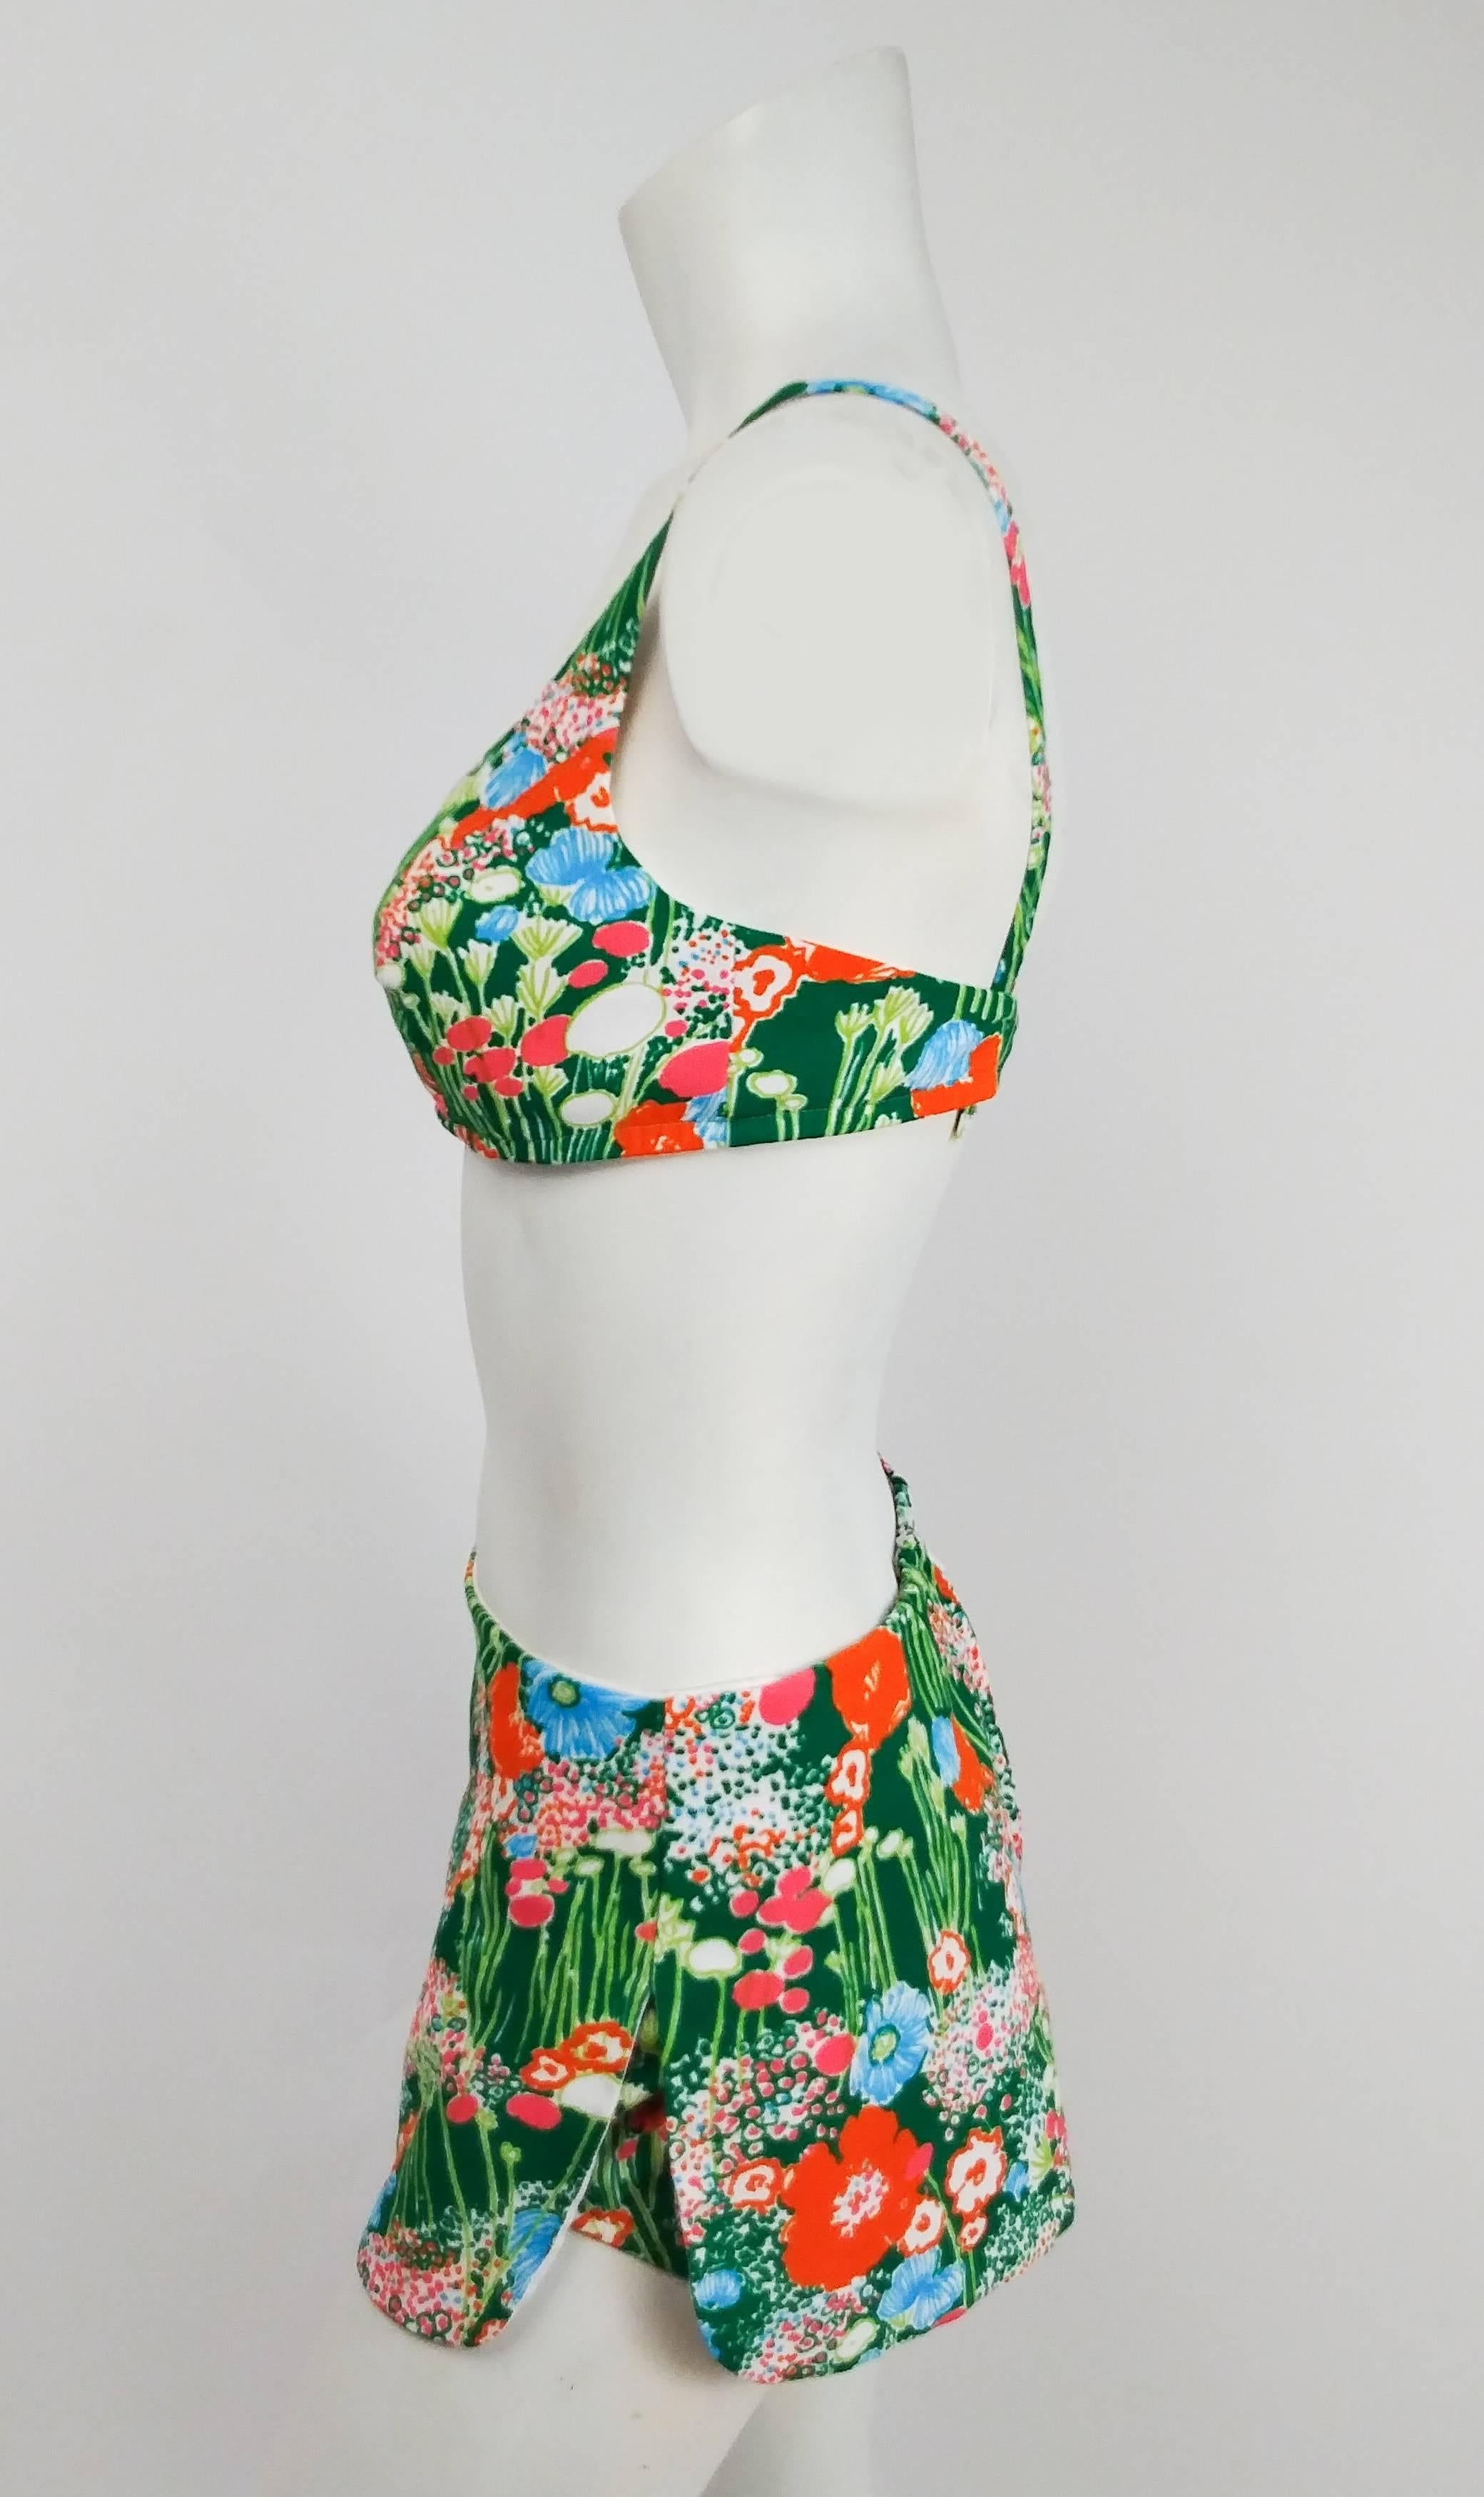 1960s Flower Print Two Piece Bikini Swimsuit. Top has built-in bra and adjustable back straps. Skirt bottom zips up back. 